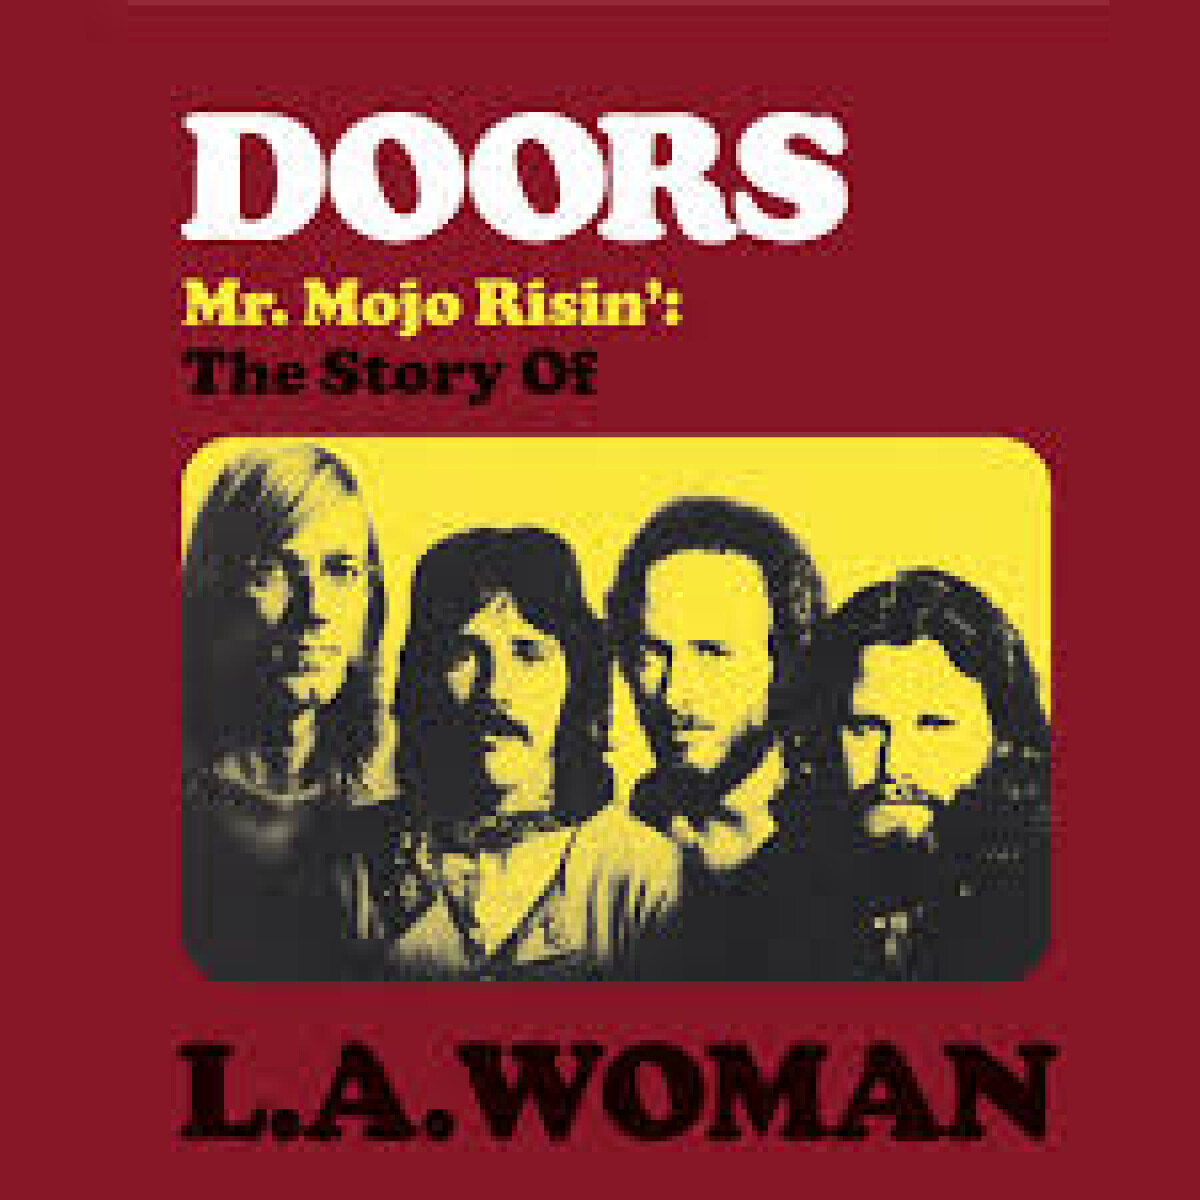 The Doors-l.a. Woman (expanded) - Cd 